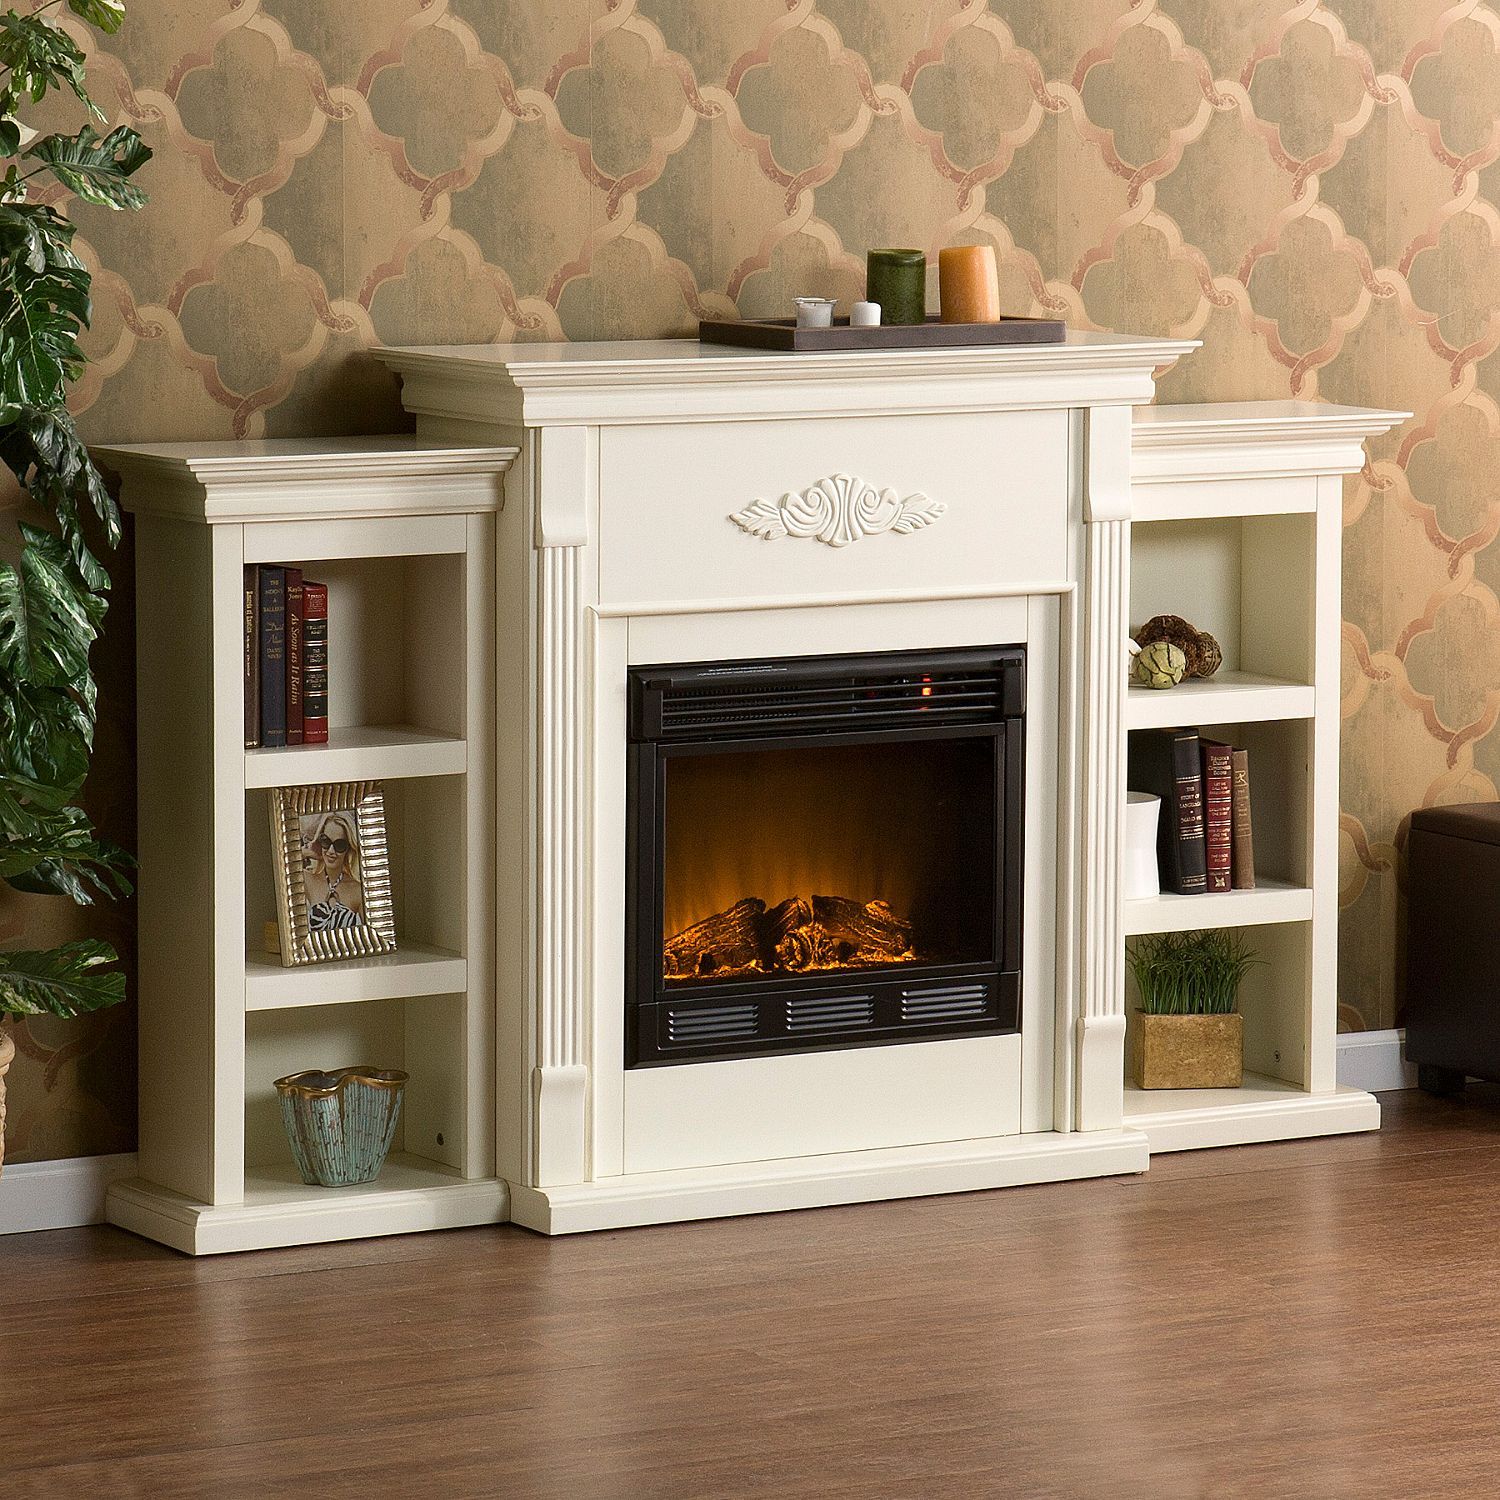 White Stone Electric Fireplace Inspirational Emerson Electric Fireplace Ivory Sam S Club